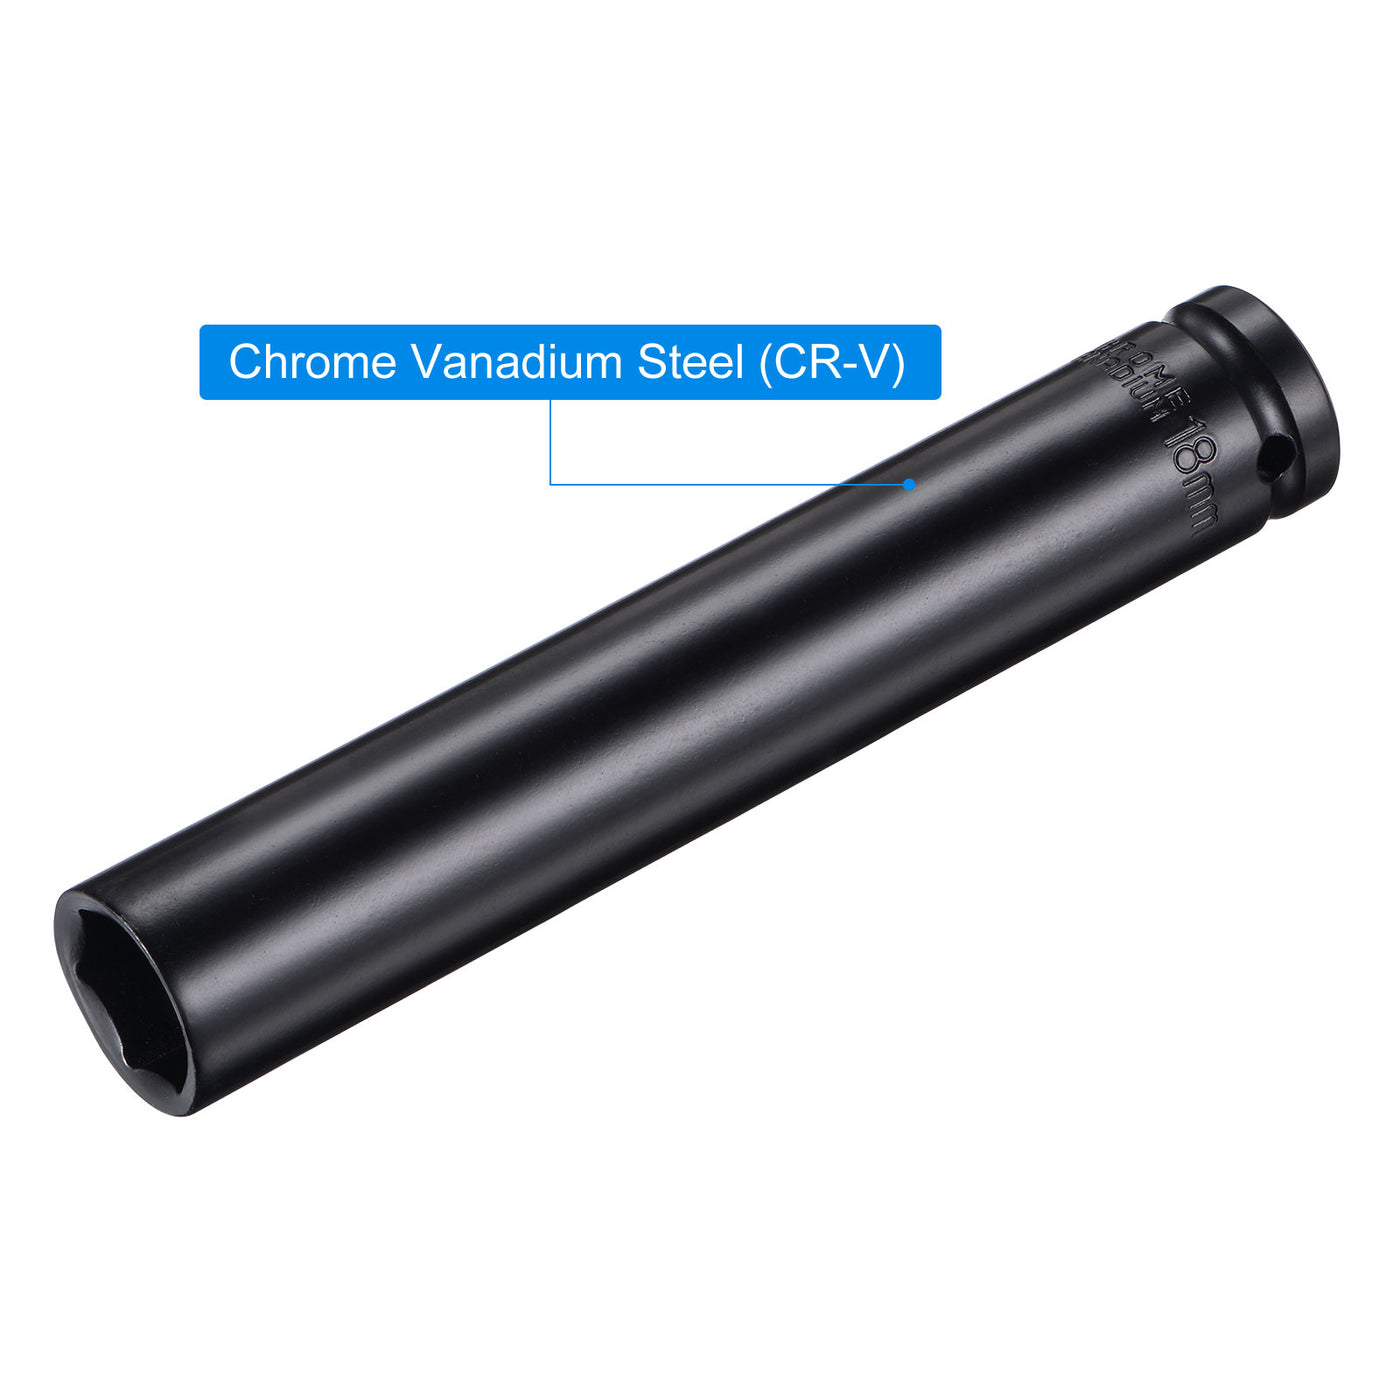 uxcell Uxcell Square Drive x Deep Impact Socket, CR-V Steel, 6-Point Metric Sizes